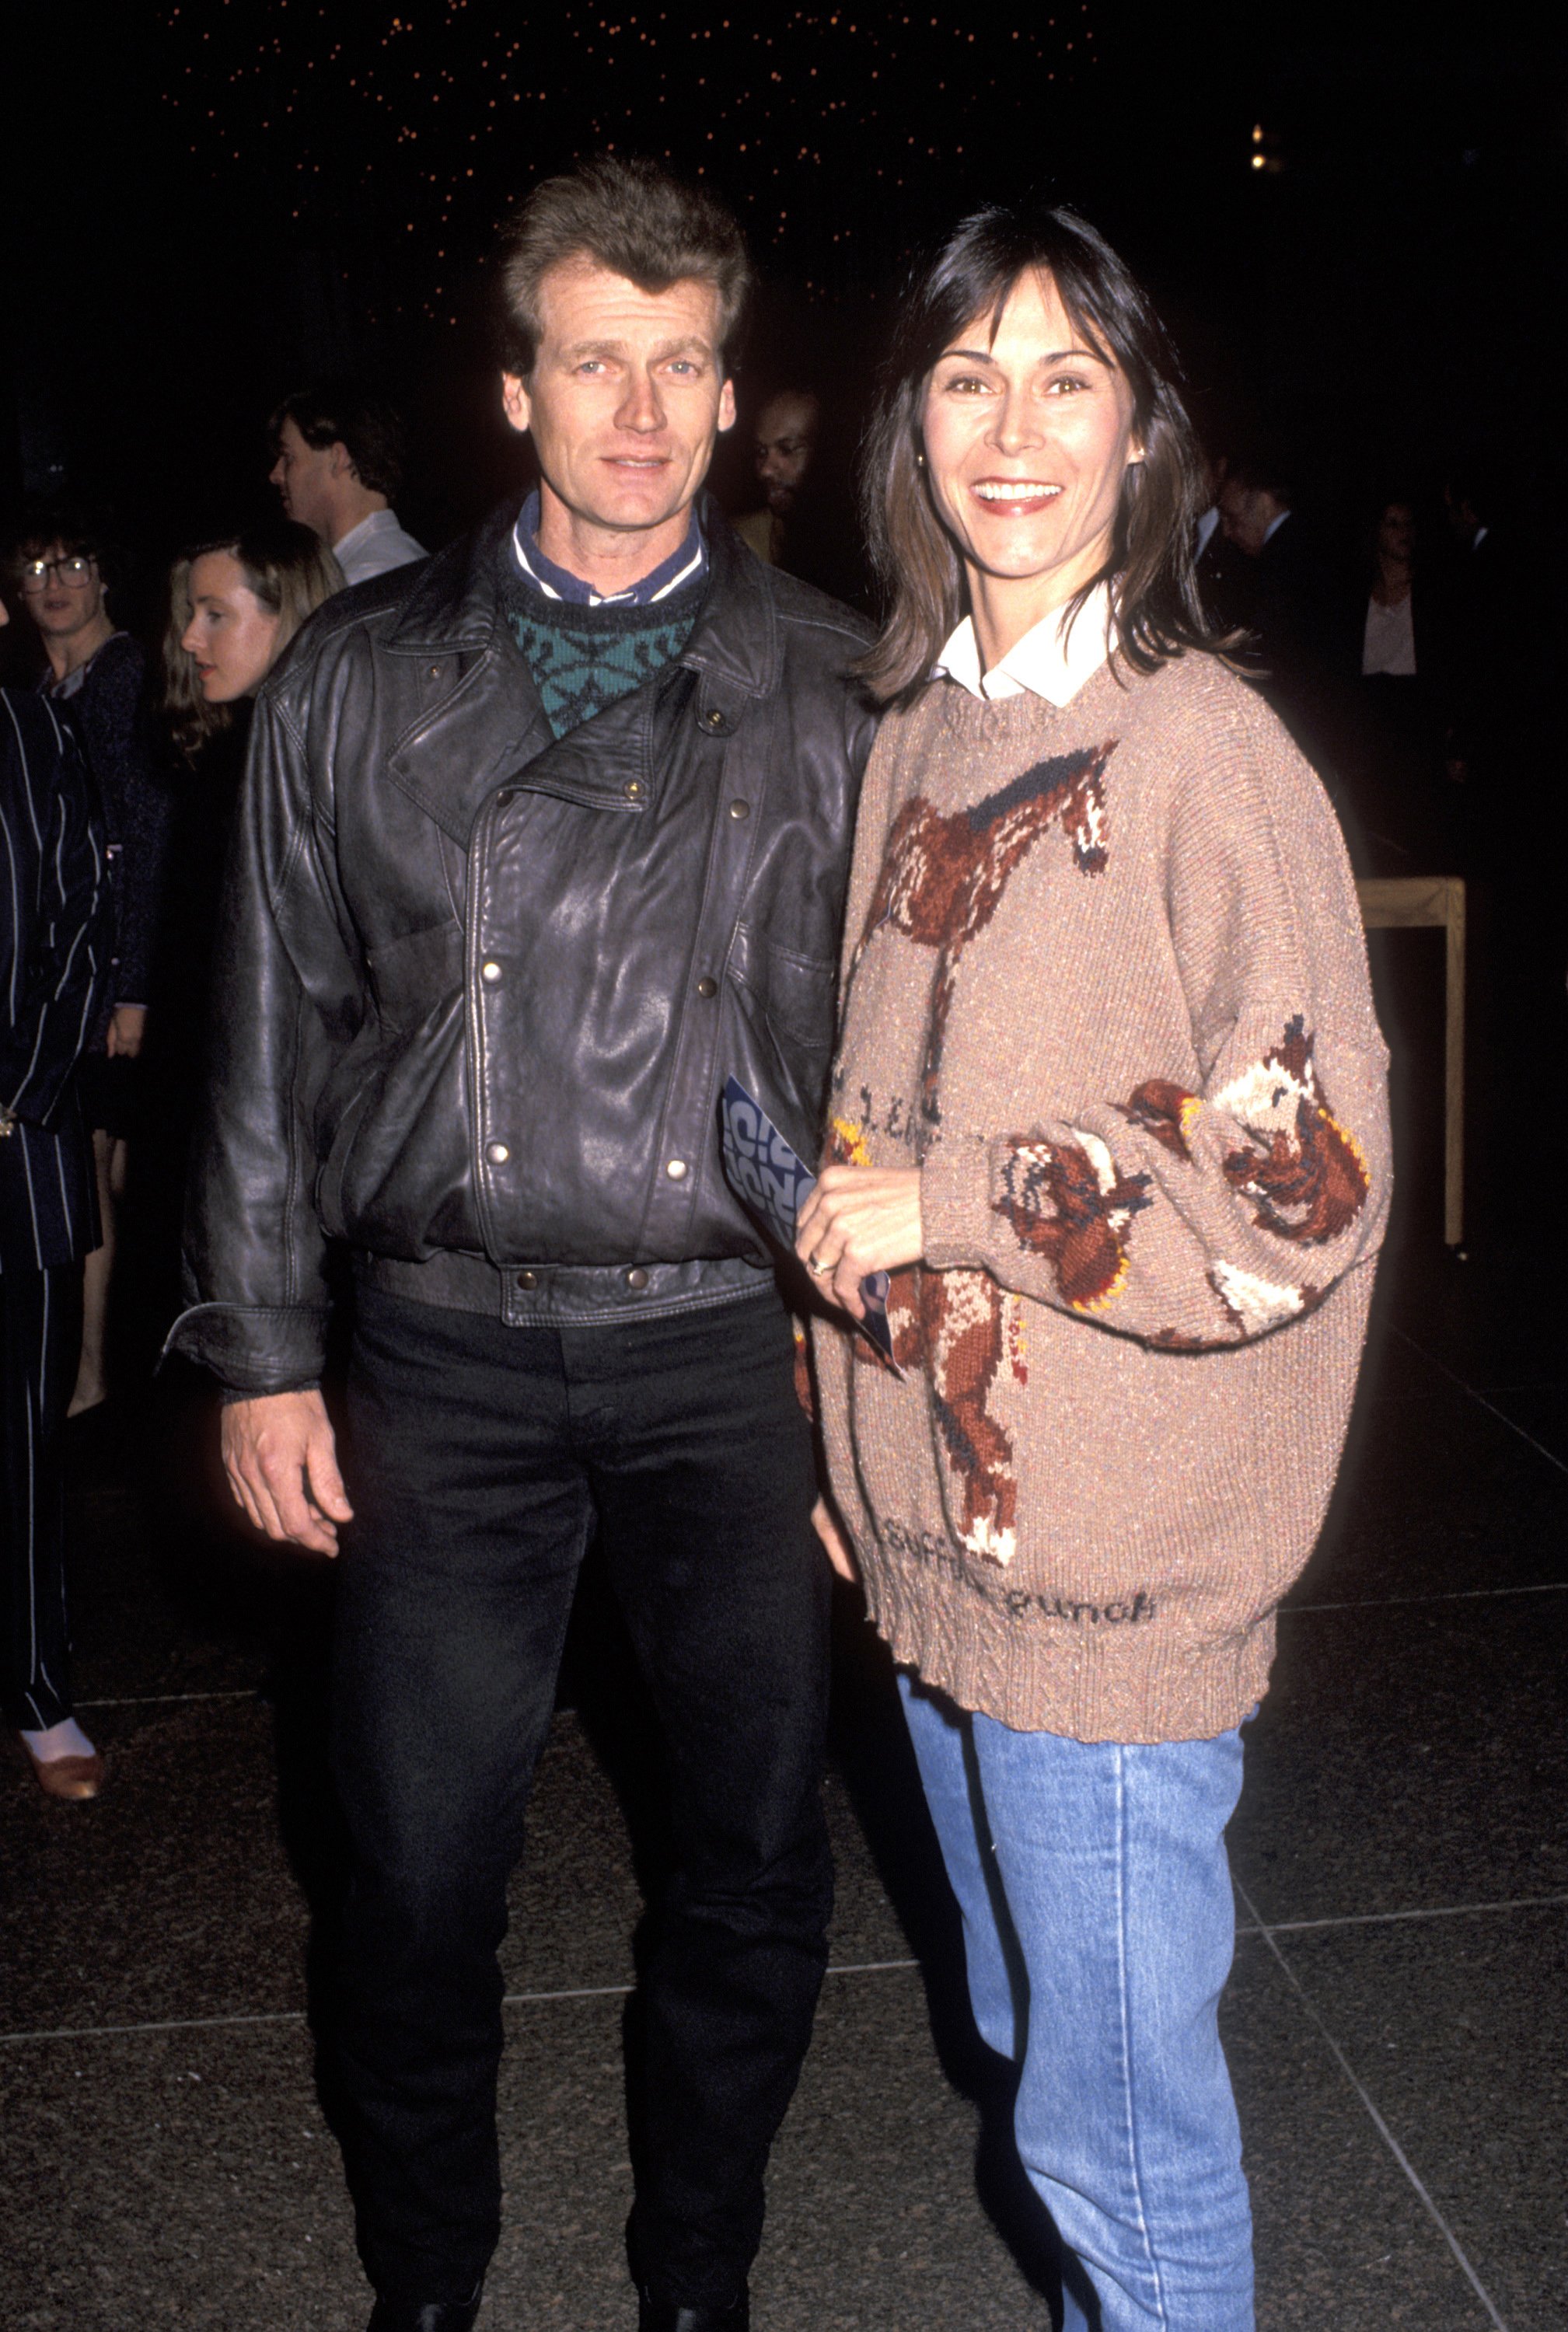 Kate Jackson and Tom Hart at the Los Angeles premiere of "Article 99" | Source: Getty Images